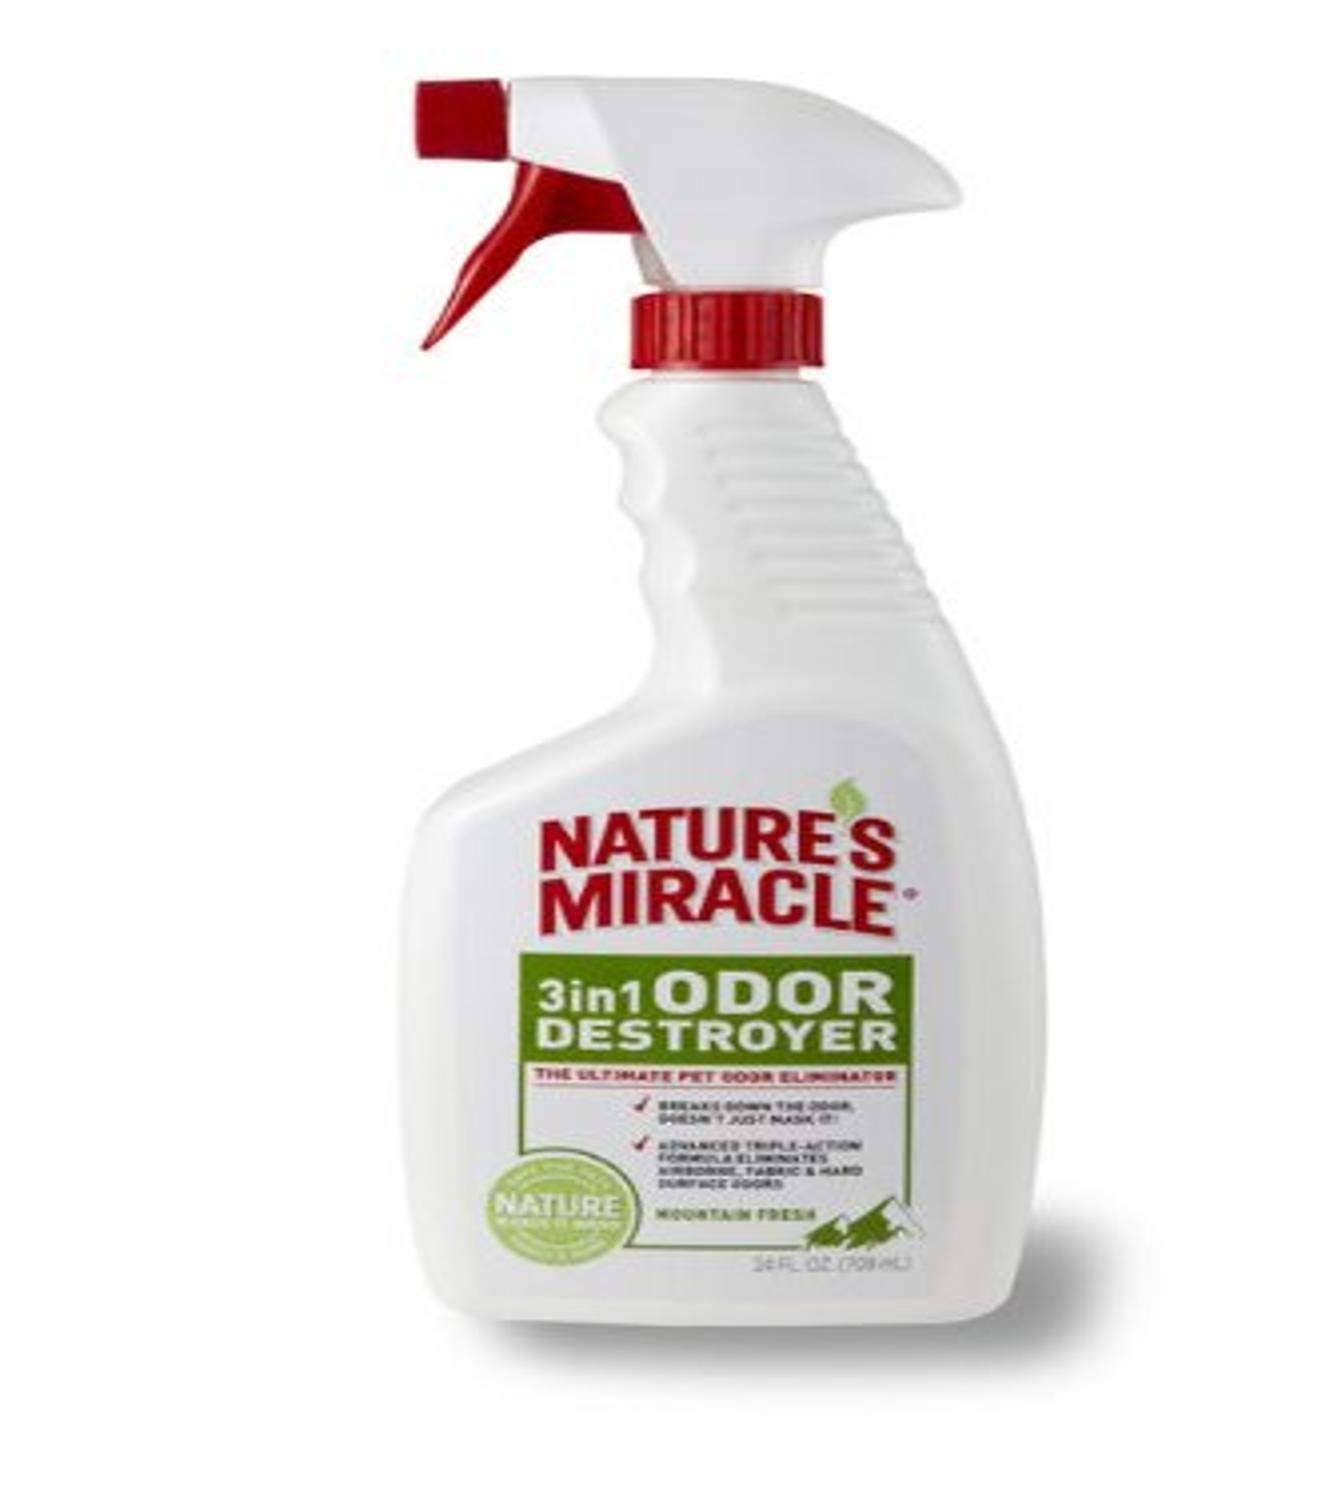 Nature's Miracle 3-in-1 Odor Destroyer - 24 oz